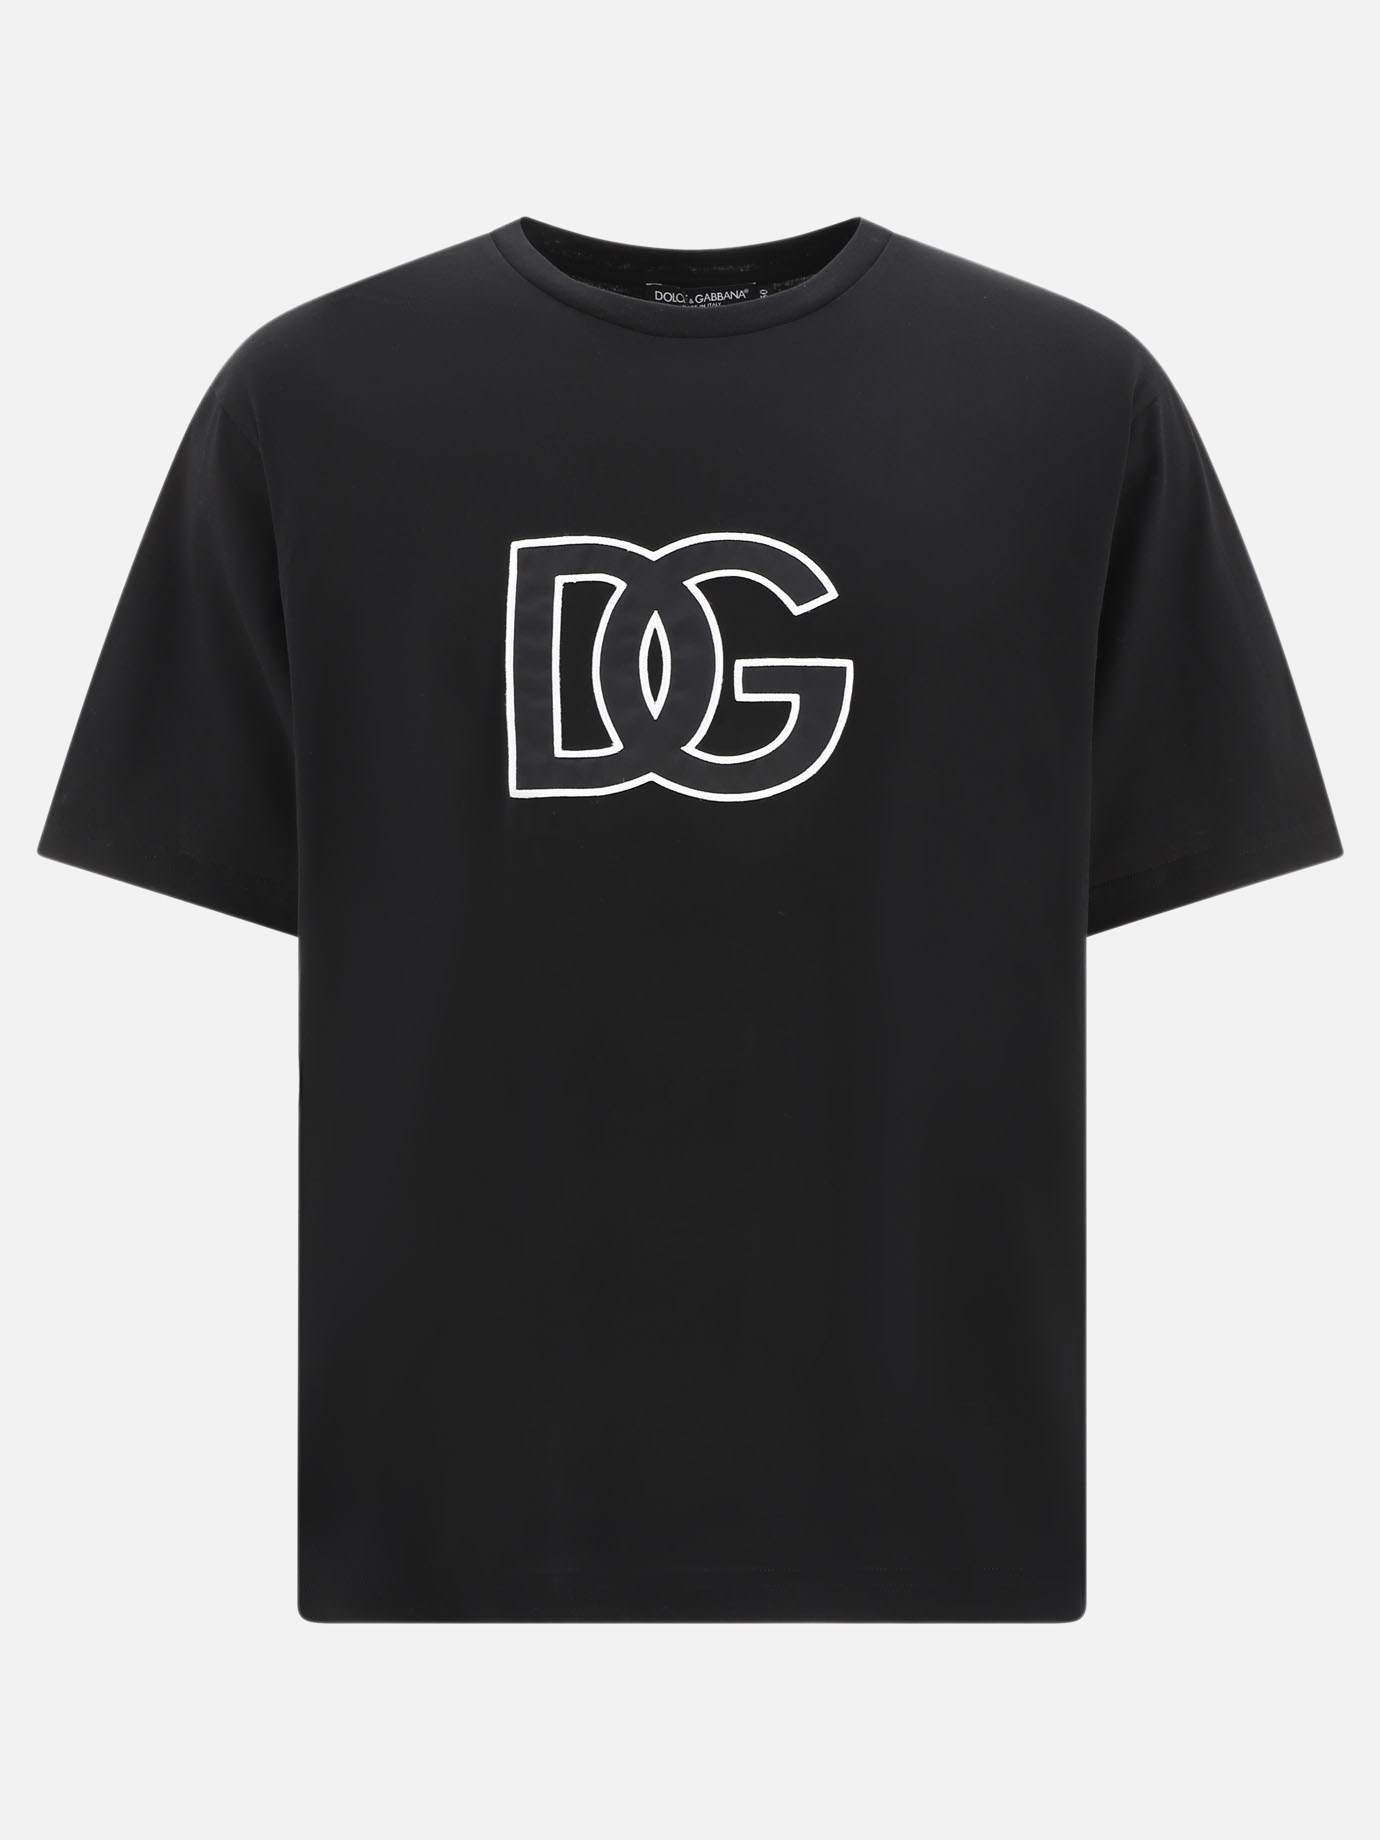 T-shirt con patch  DG  by Dolce & Gabbana